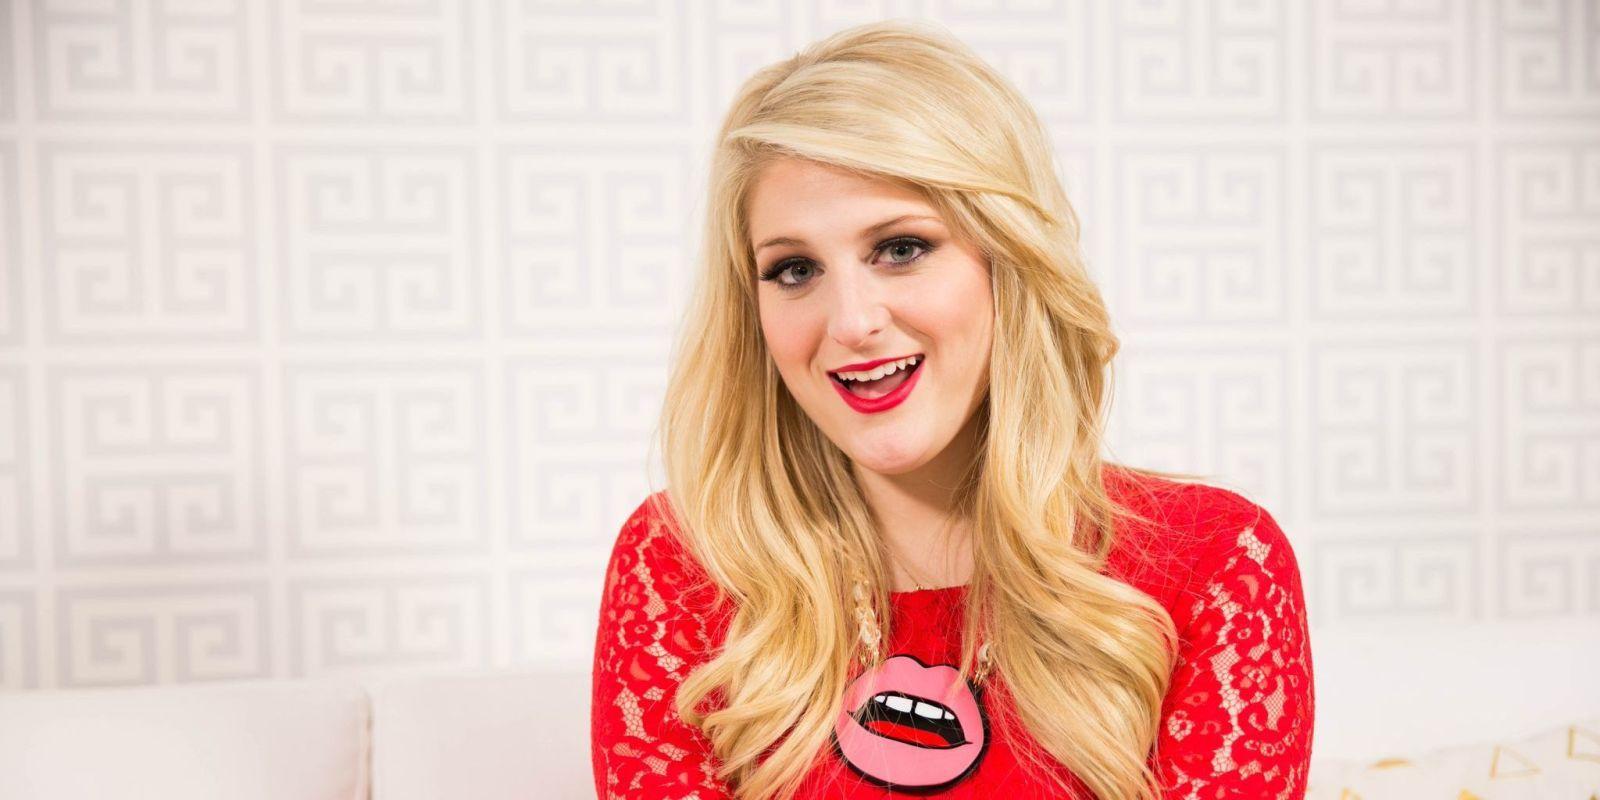 Meghan Trainor Wallpaper High Resolution and Quality Download